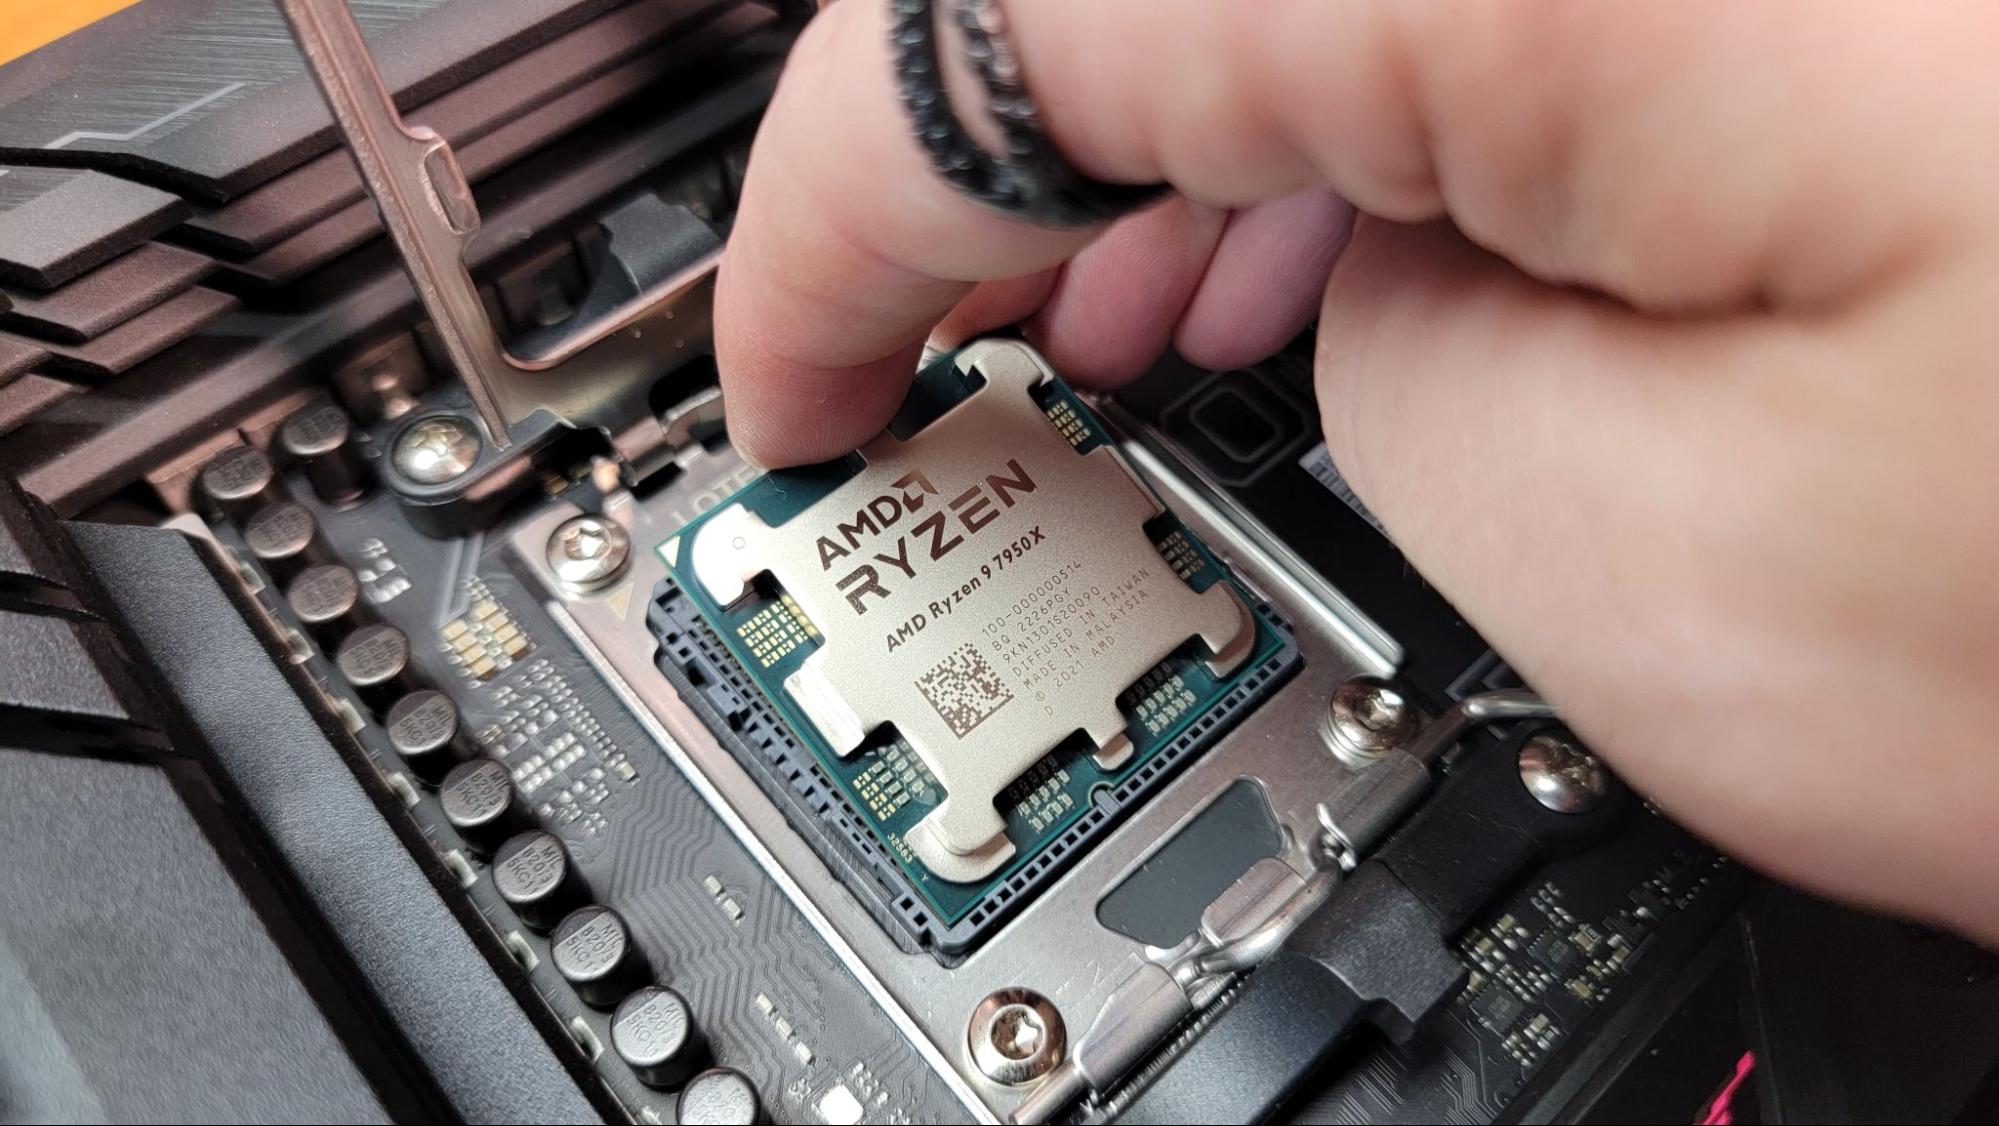 Can you install an AMD CPU in a motherboard with only one AM4 socket, or  will it damage the board? - Quora